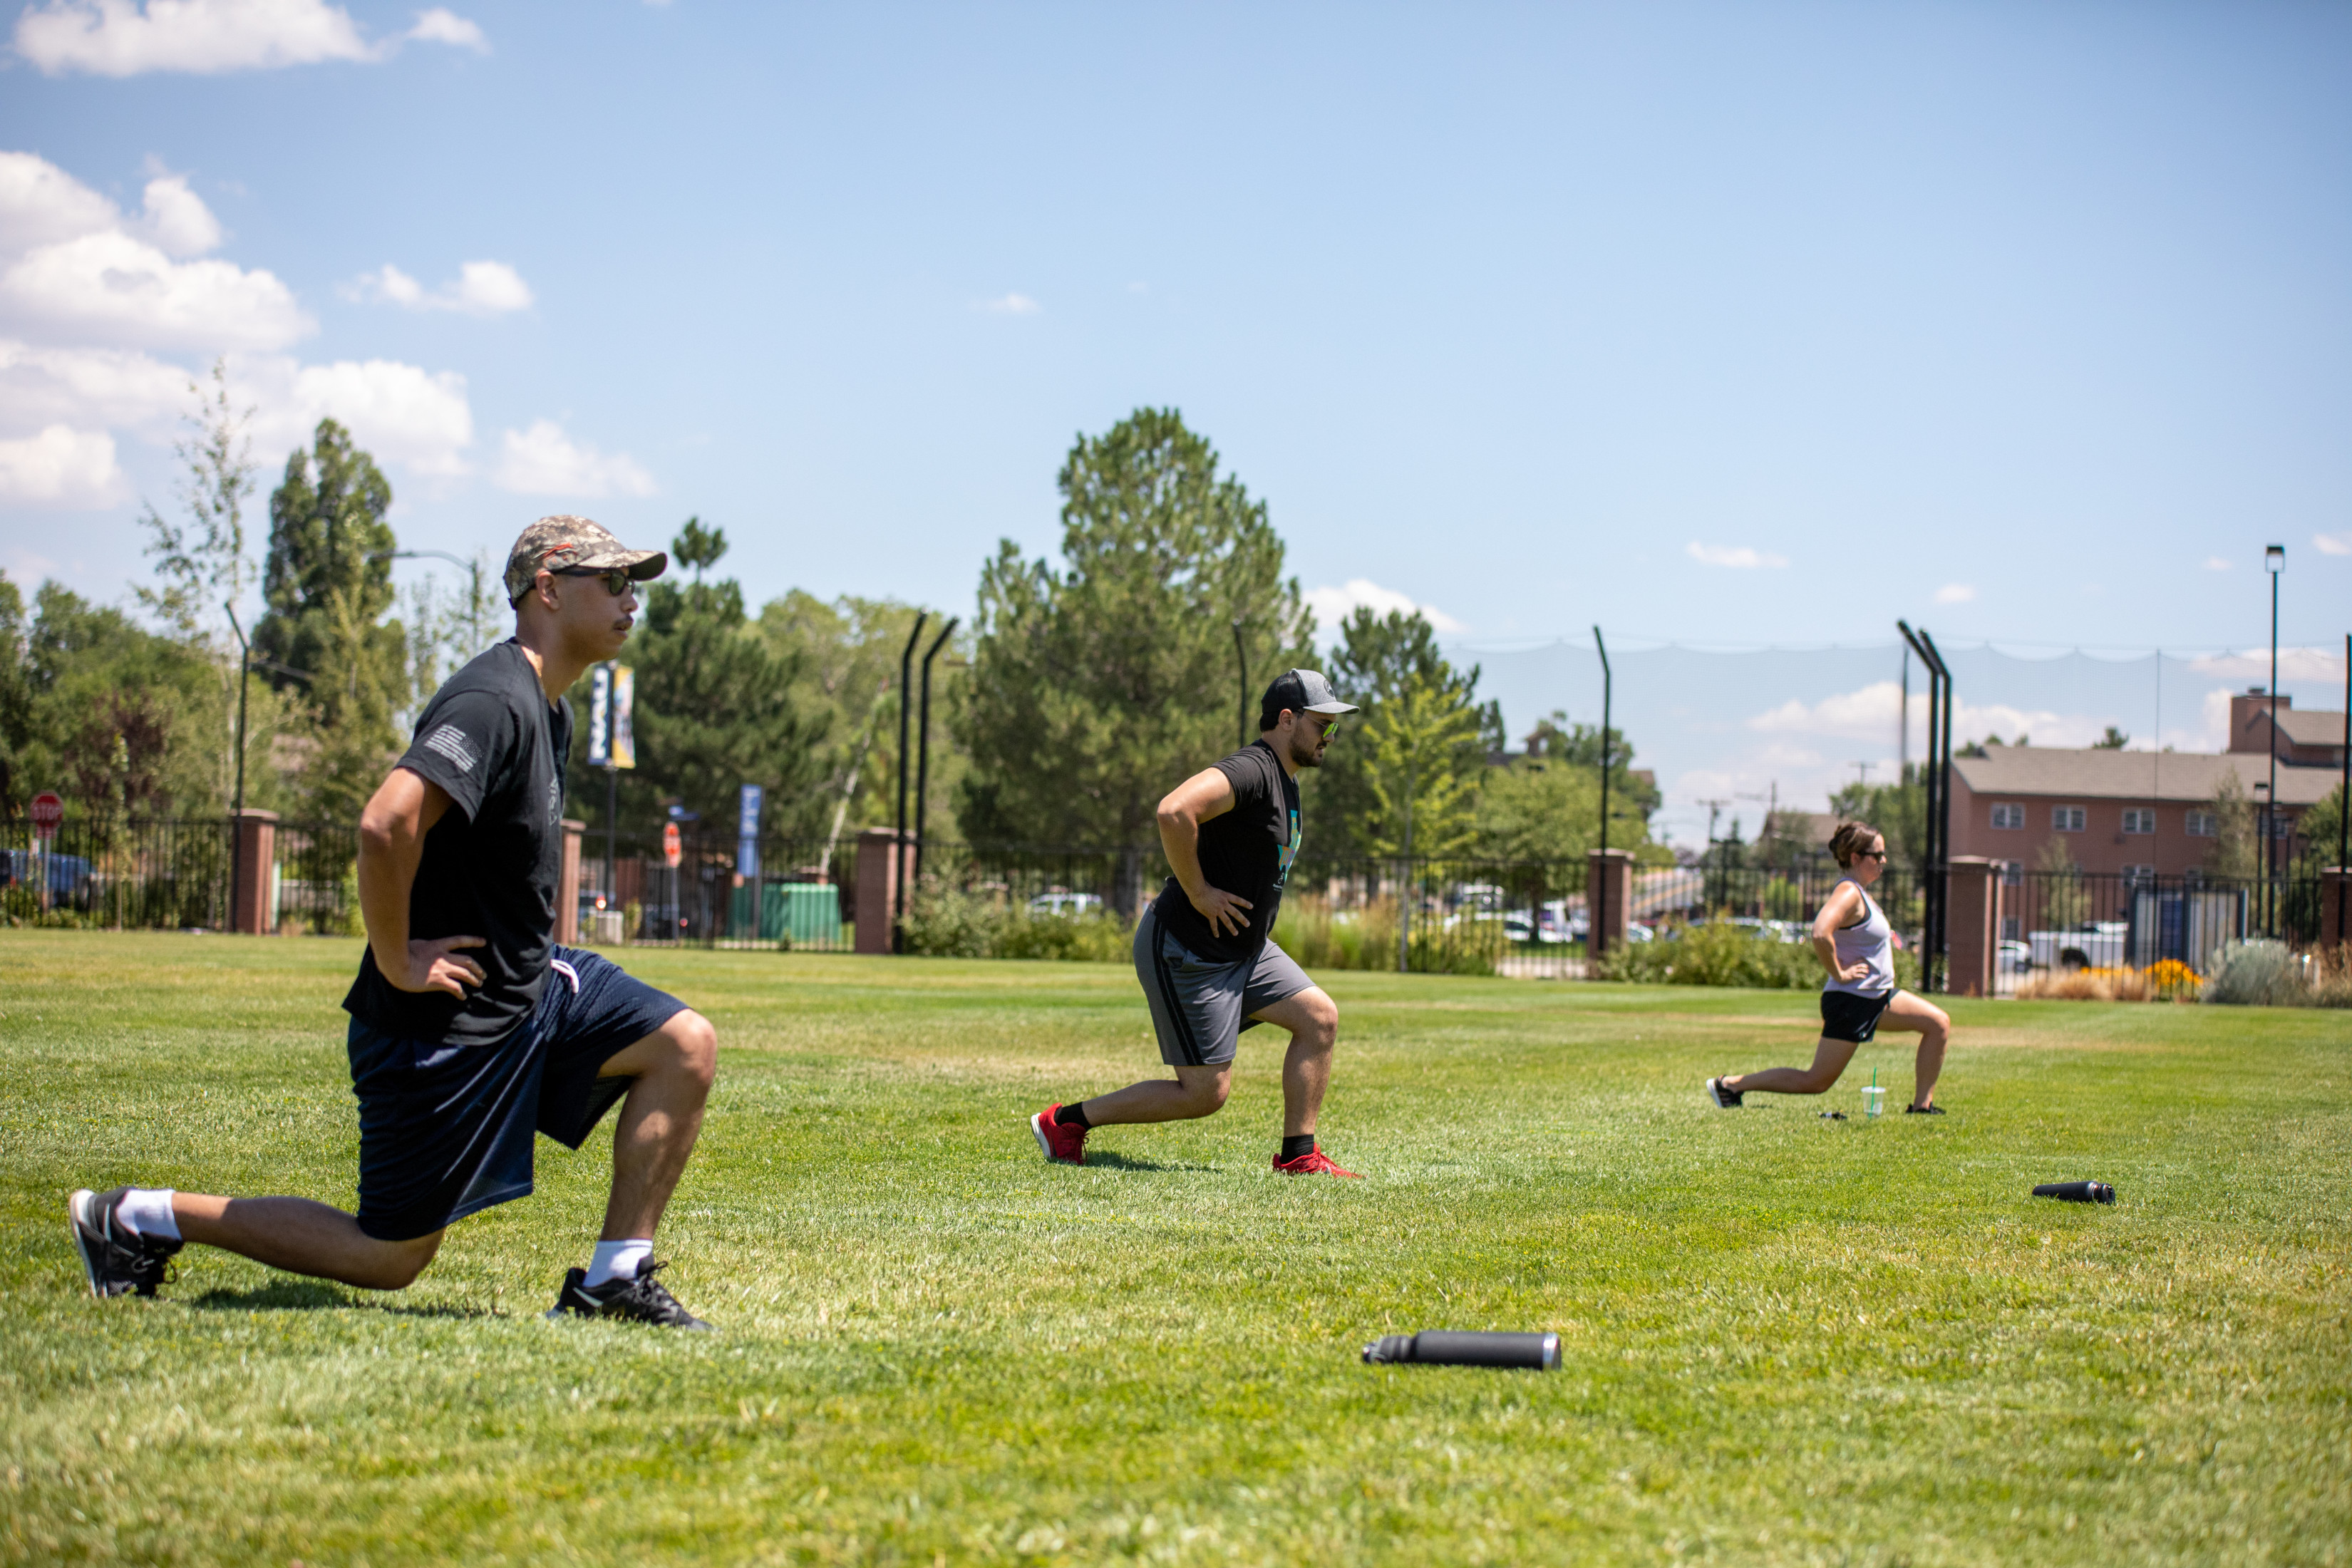 Three people on a field participating in lunging stretching exercises.